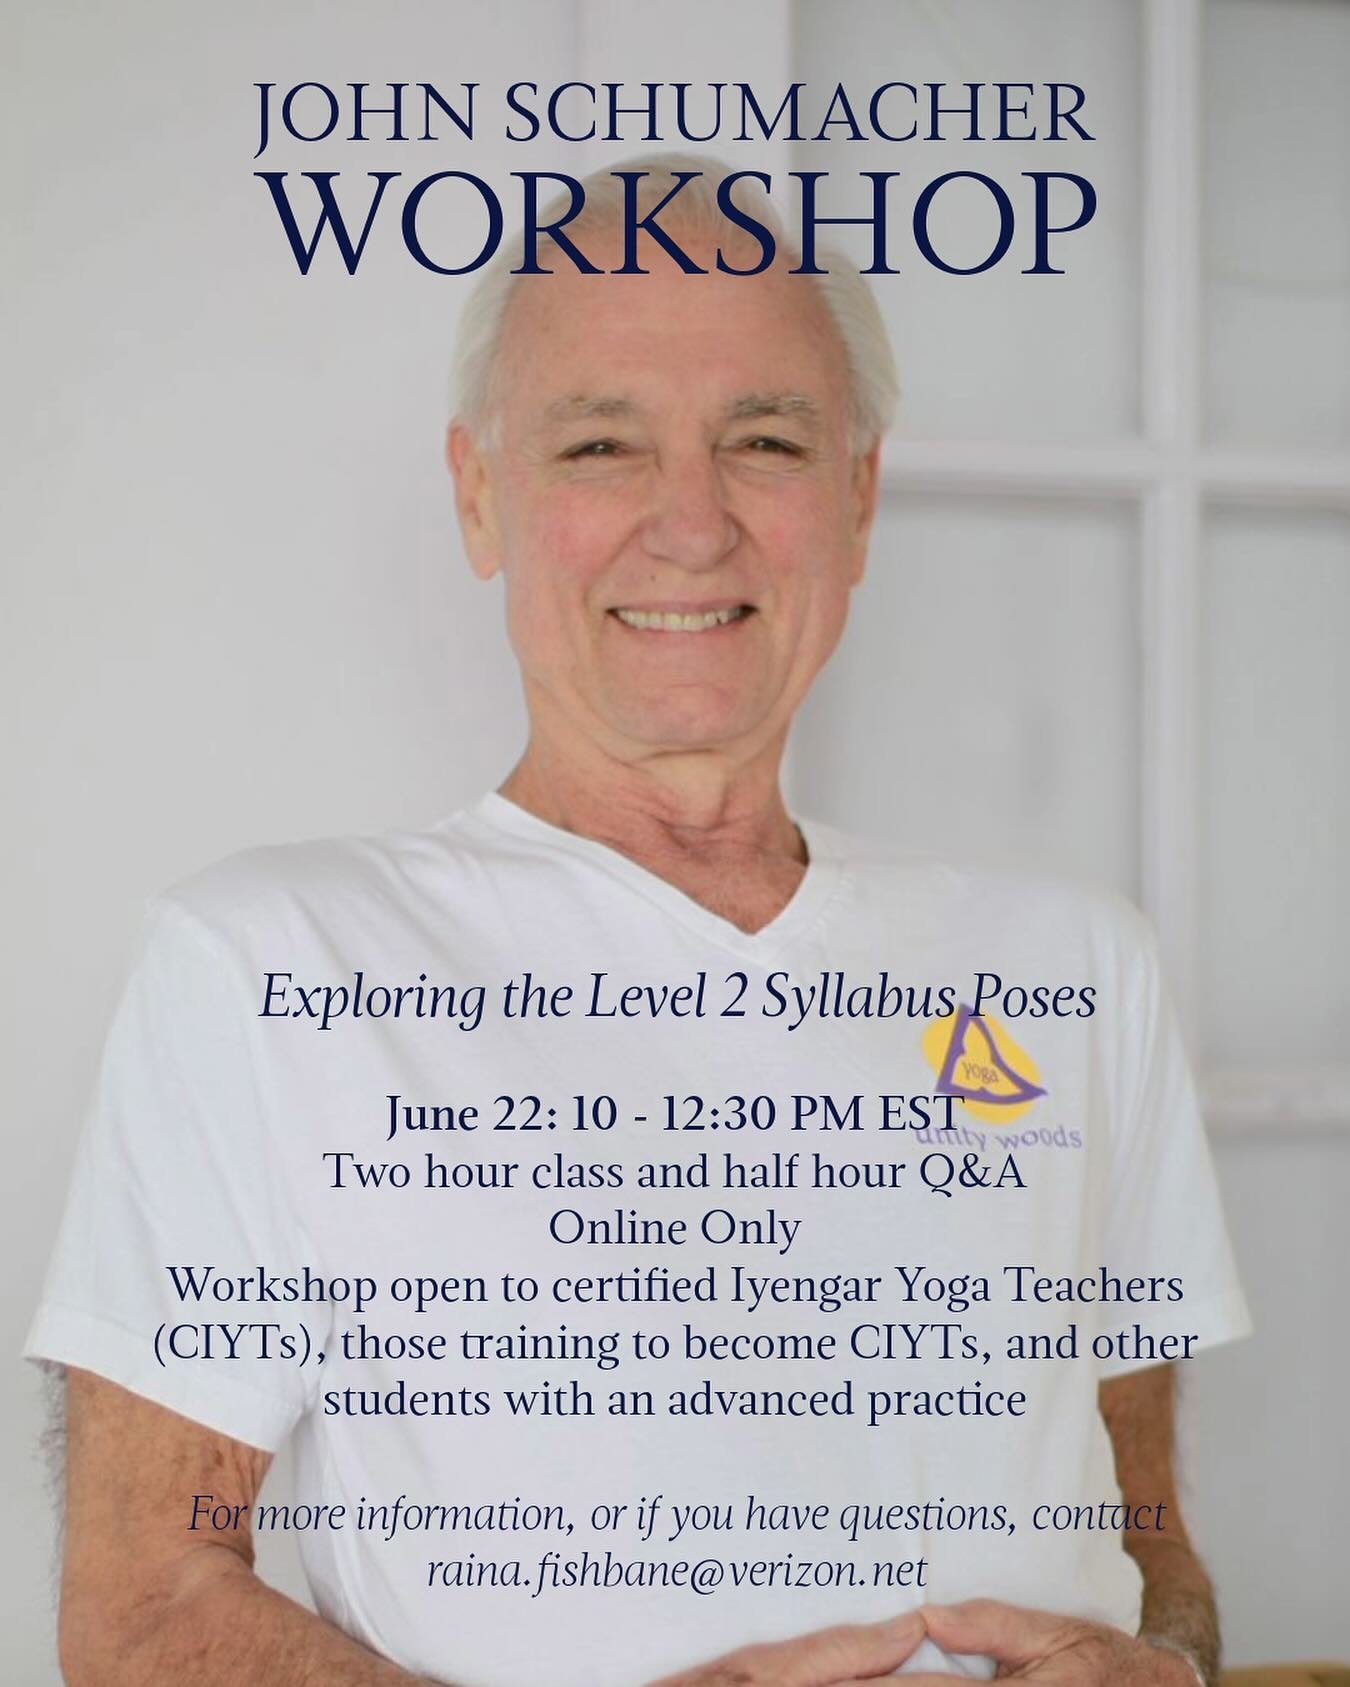 Join us for this exciting (and rare!) opportunity! 
The link to register will be in our &quot;links&quot; highlight!

John Schumacher will be doing a special workshop for Path of Yoga that will explore some of the wonderful, interesting and challengi